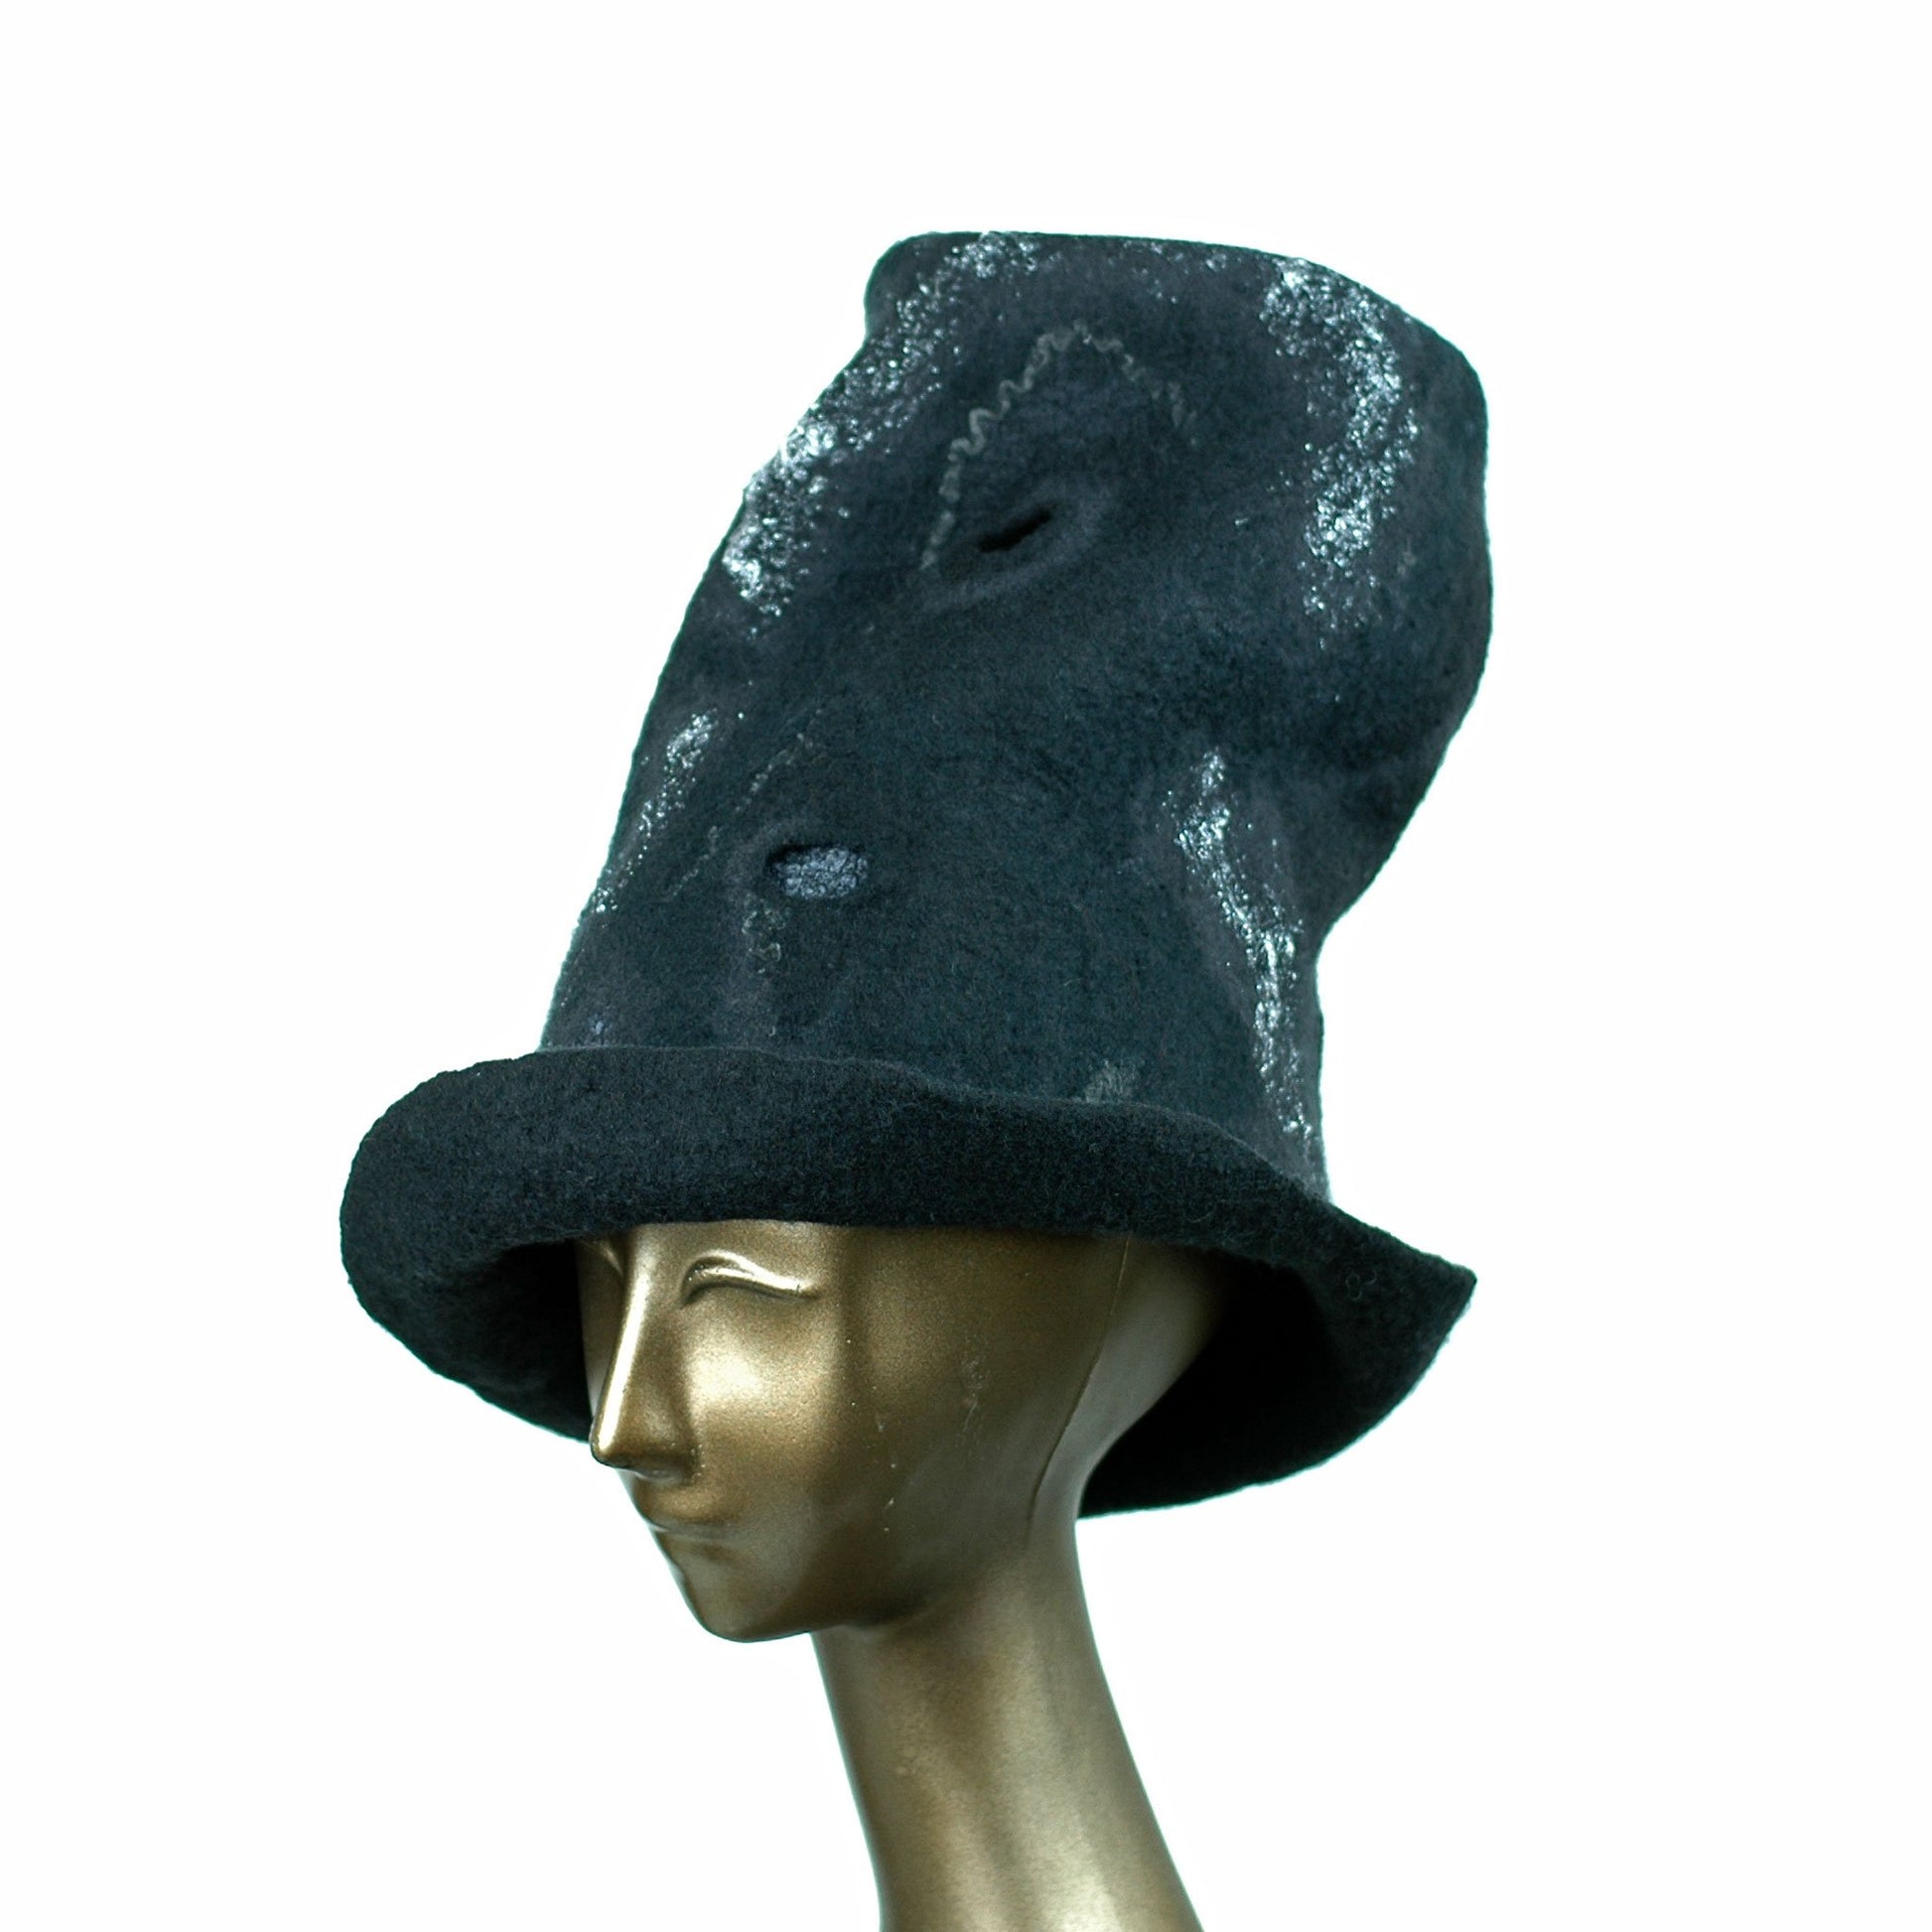 Tall Black Top Hat with Silver Nunofelted Lace - side view